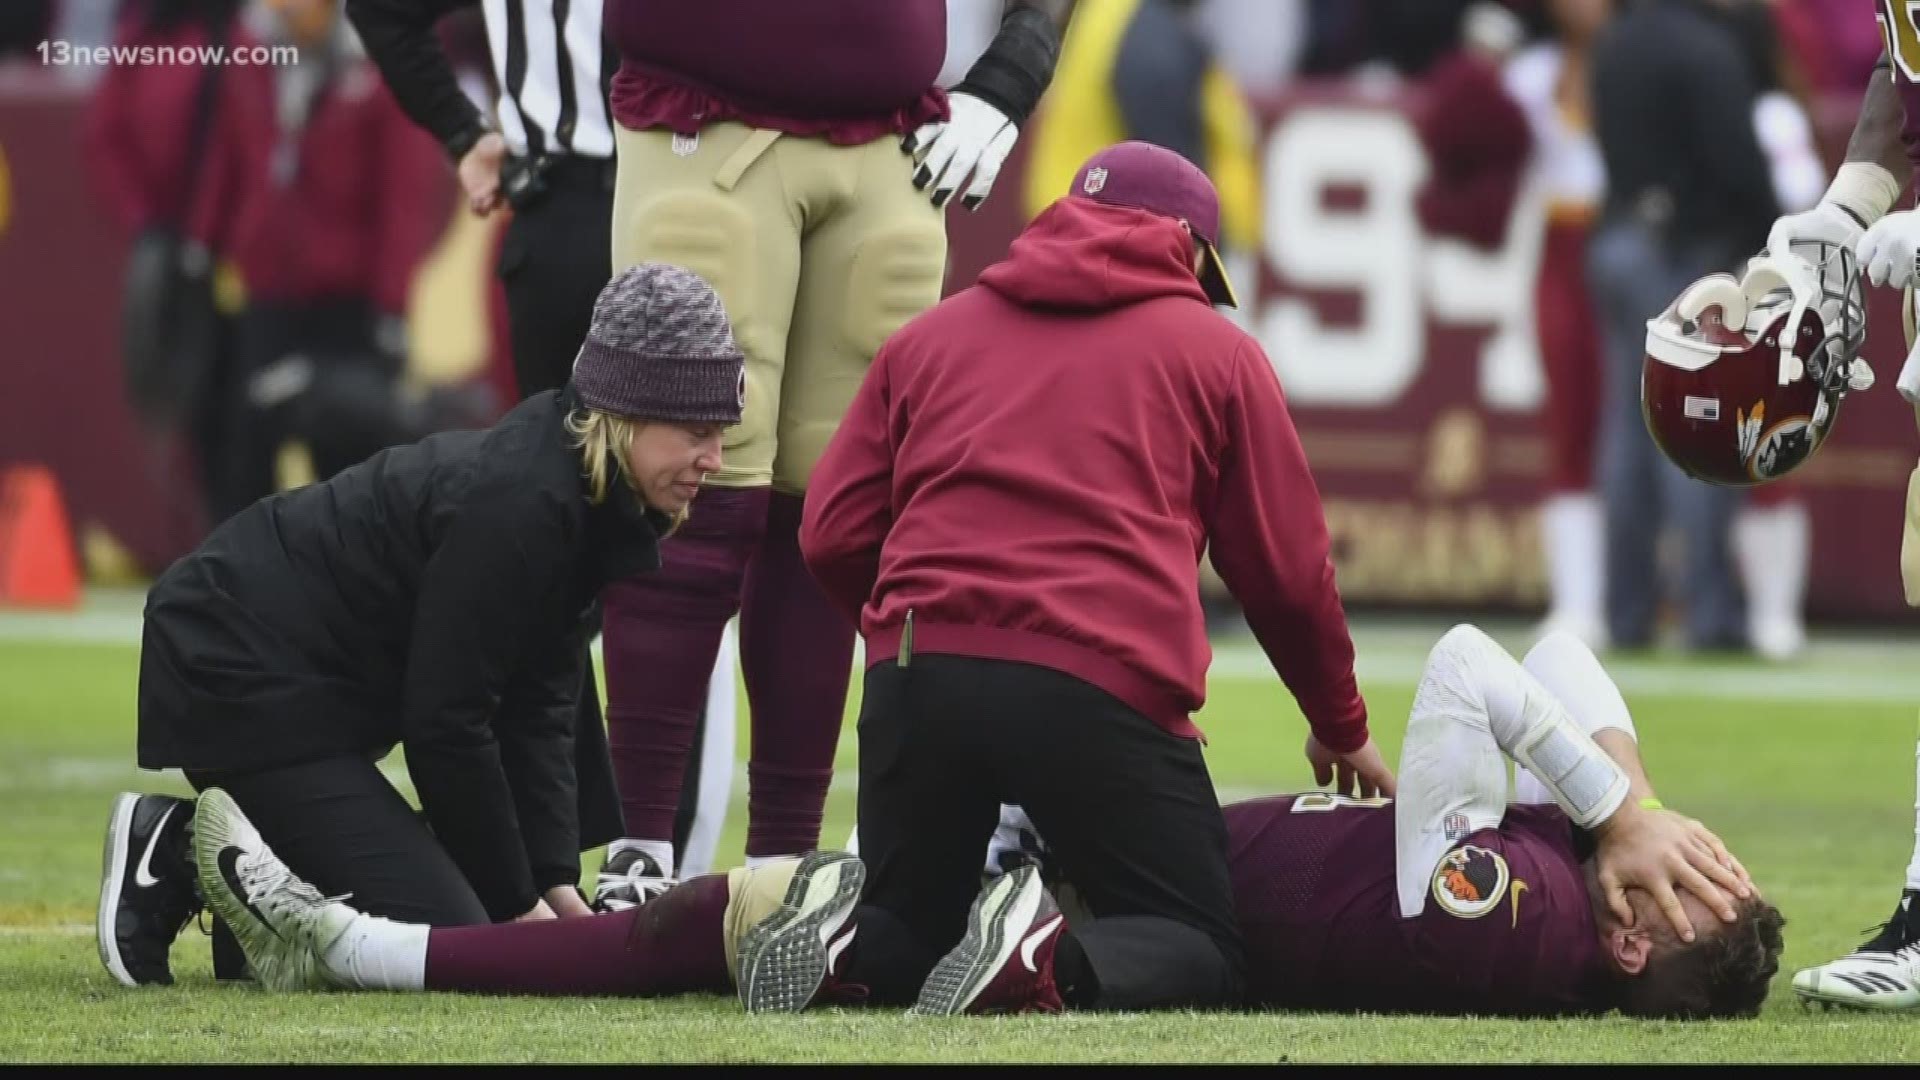 According to ESPN, the Redskins quarterback is suffering from infection from multiple surgeries to repair two broken bones in his leg.